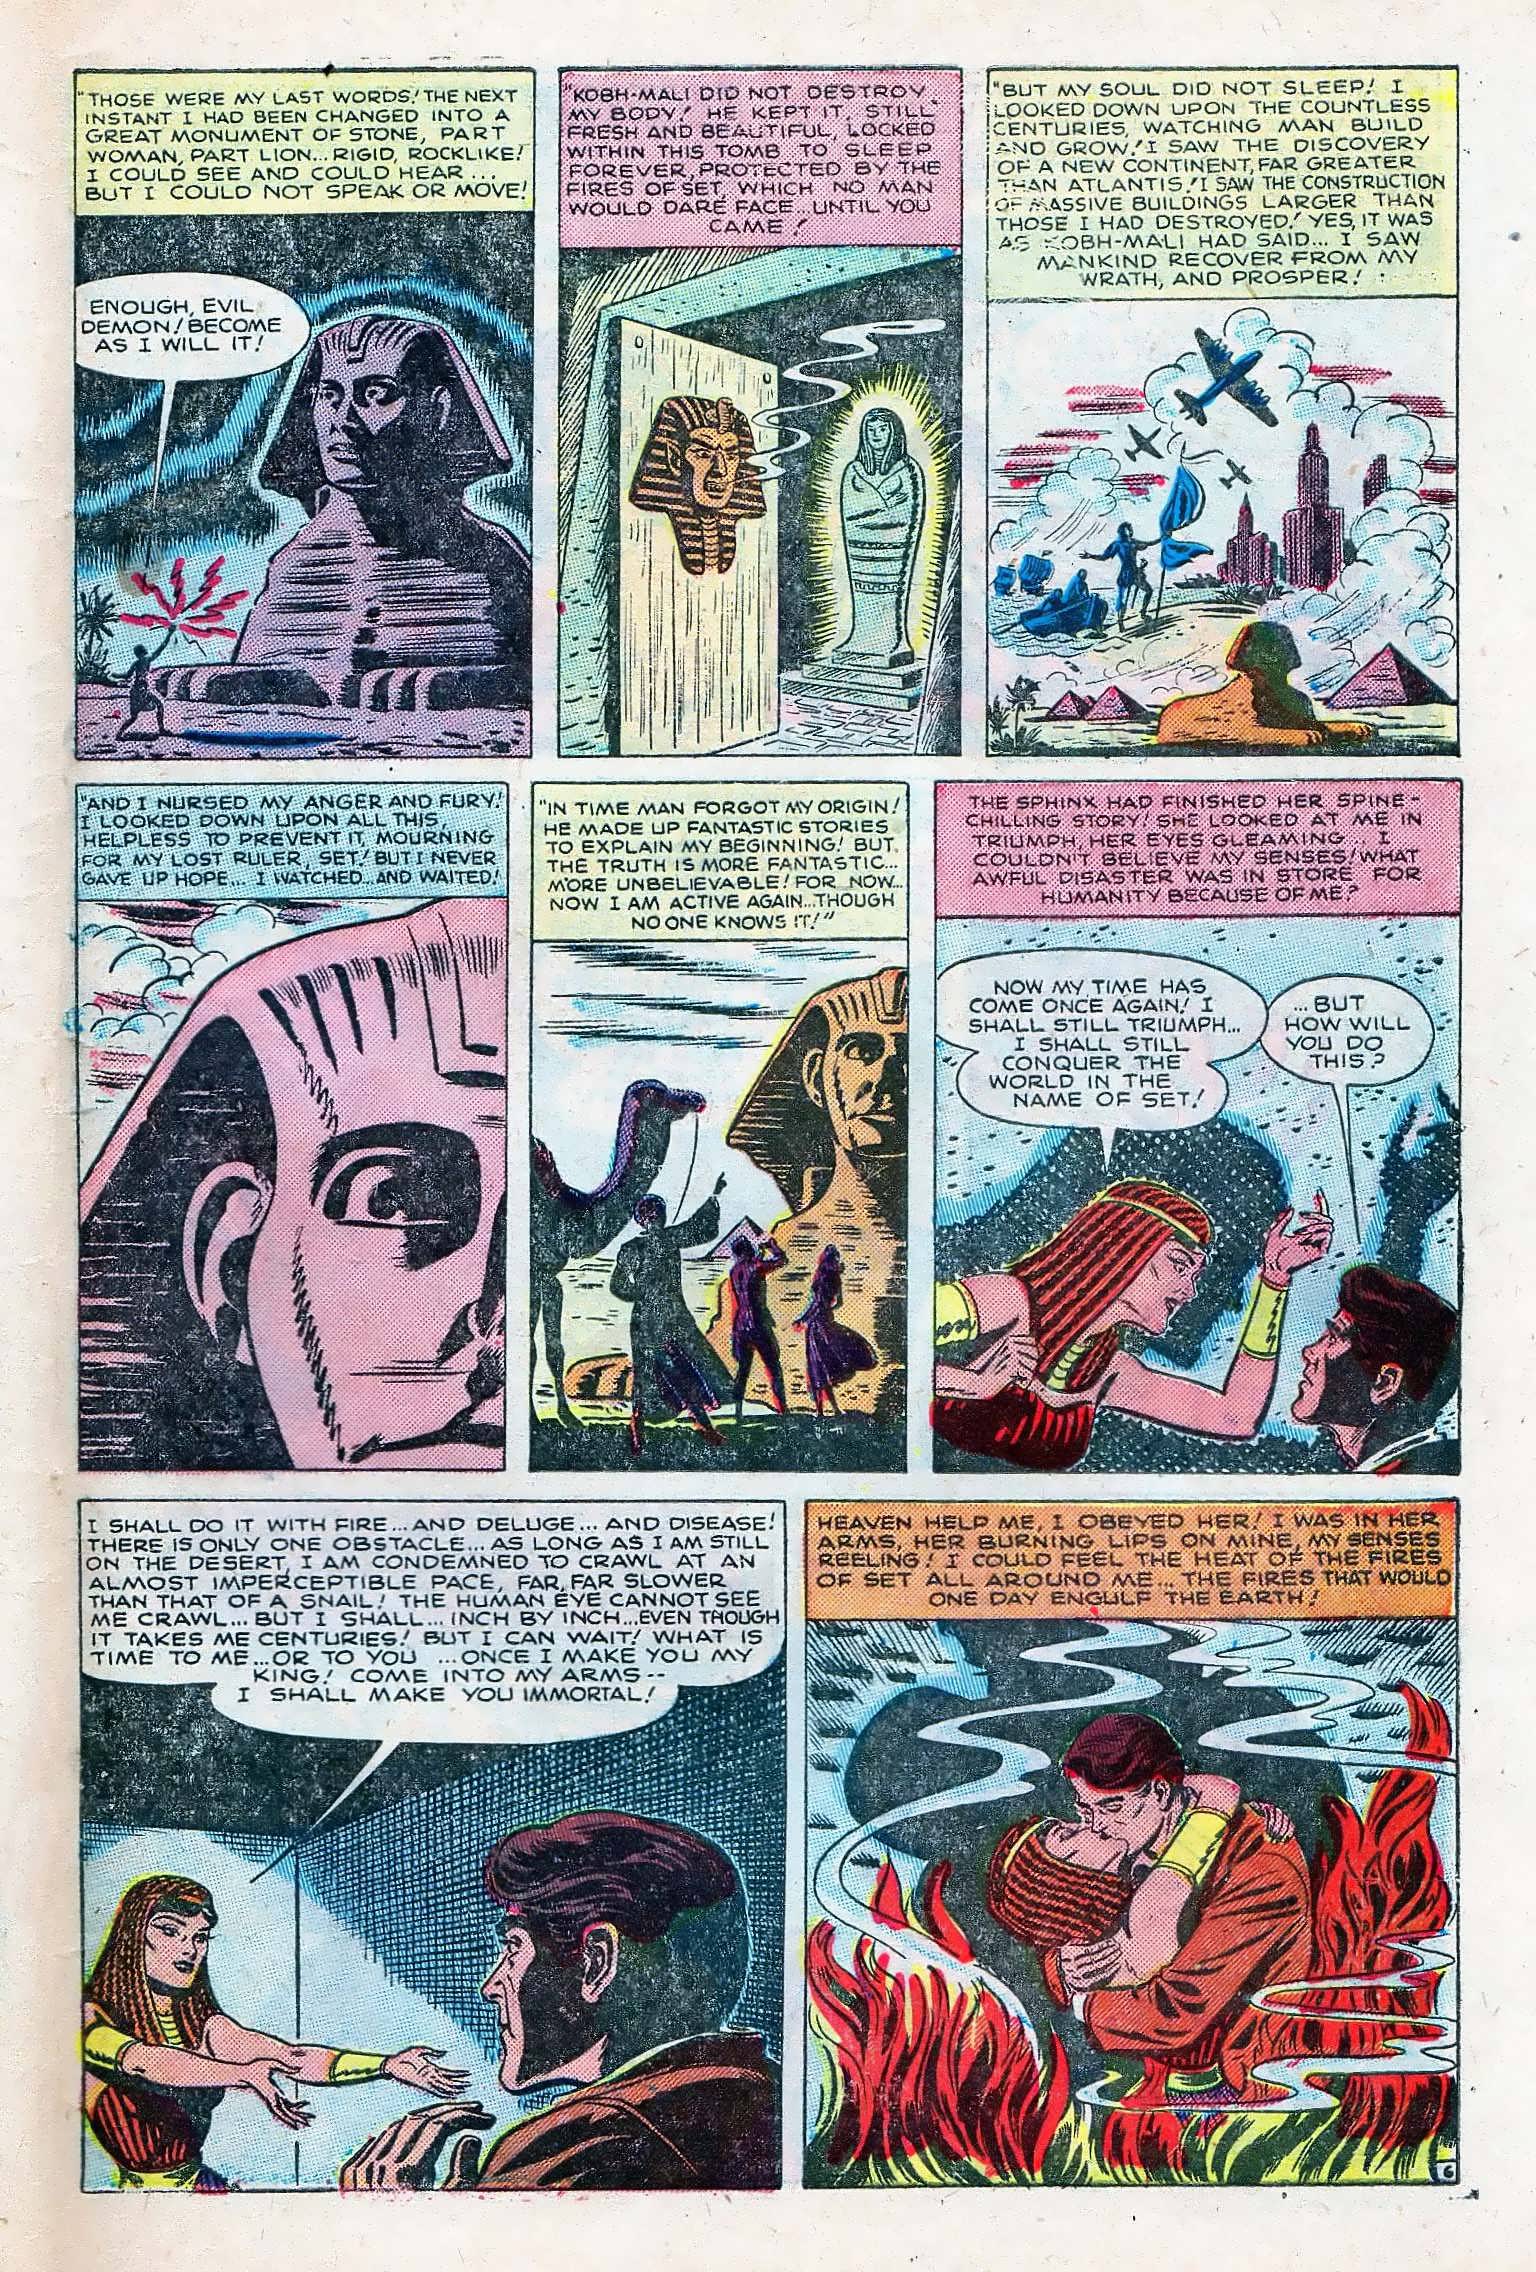 Marvel Tales (1949) 96 Page 46